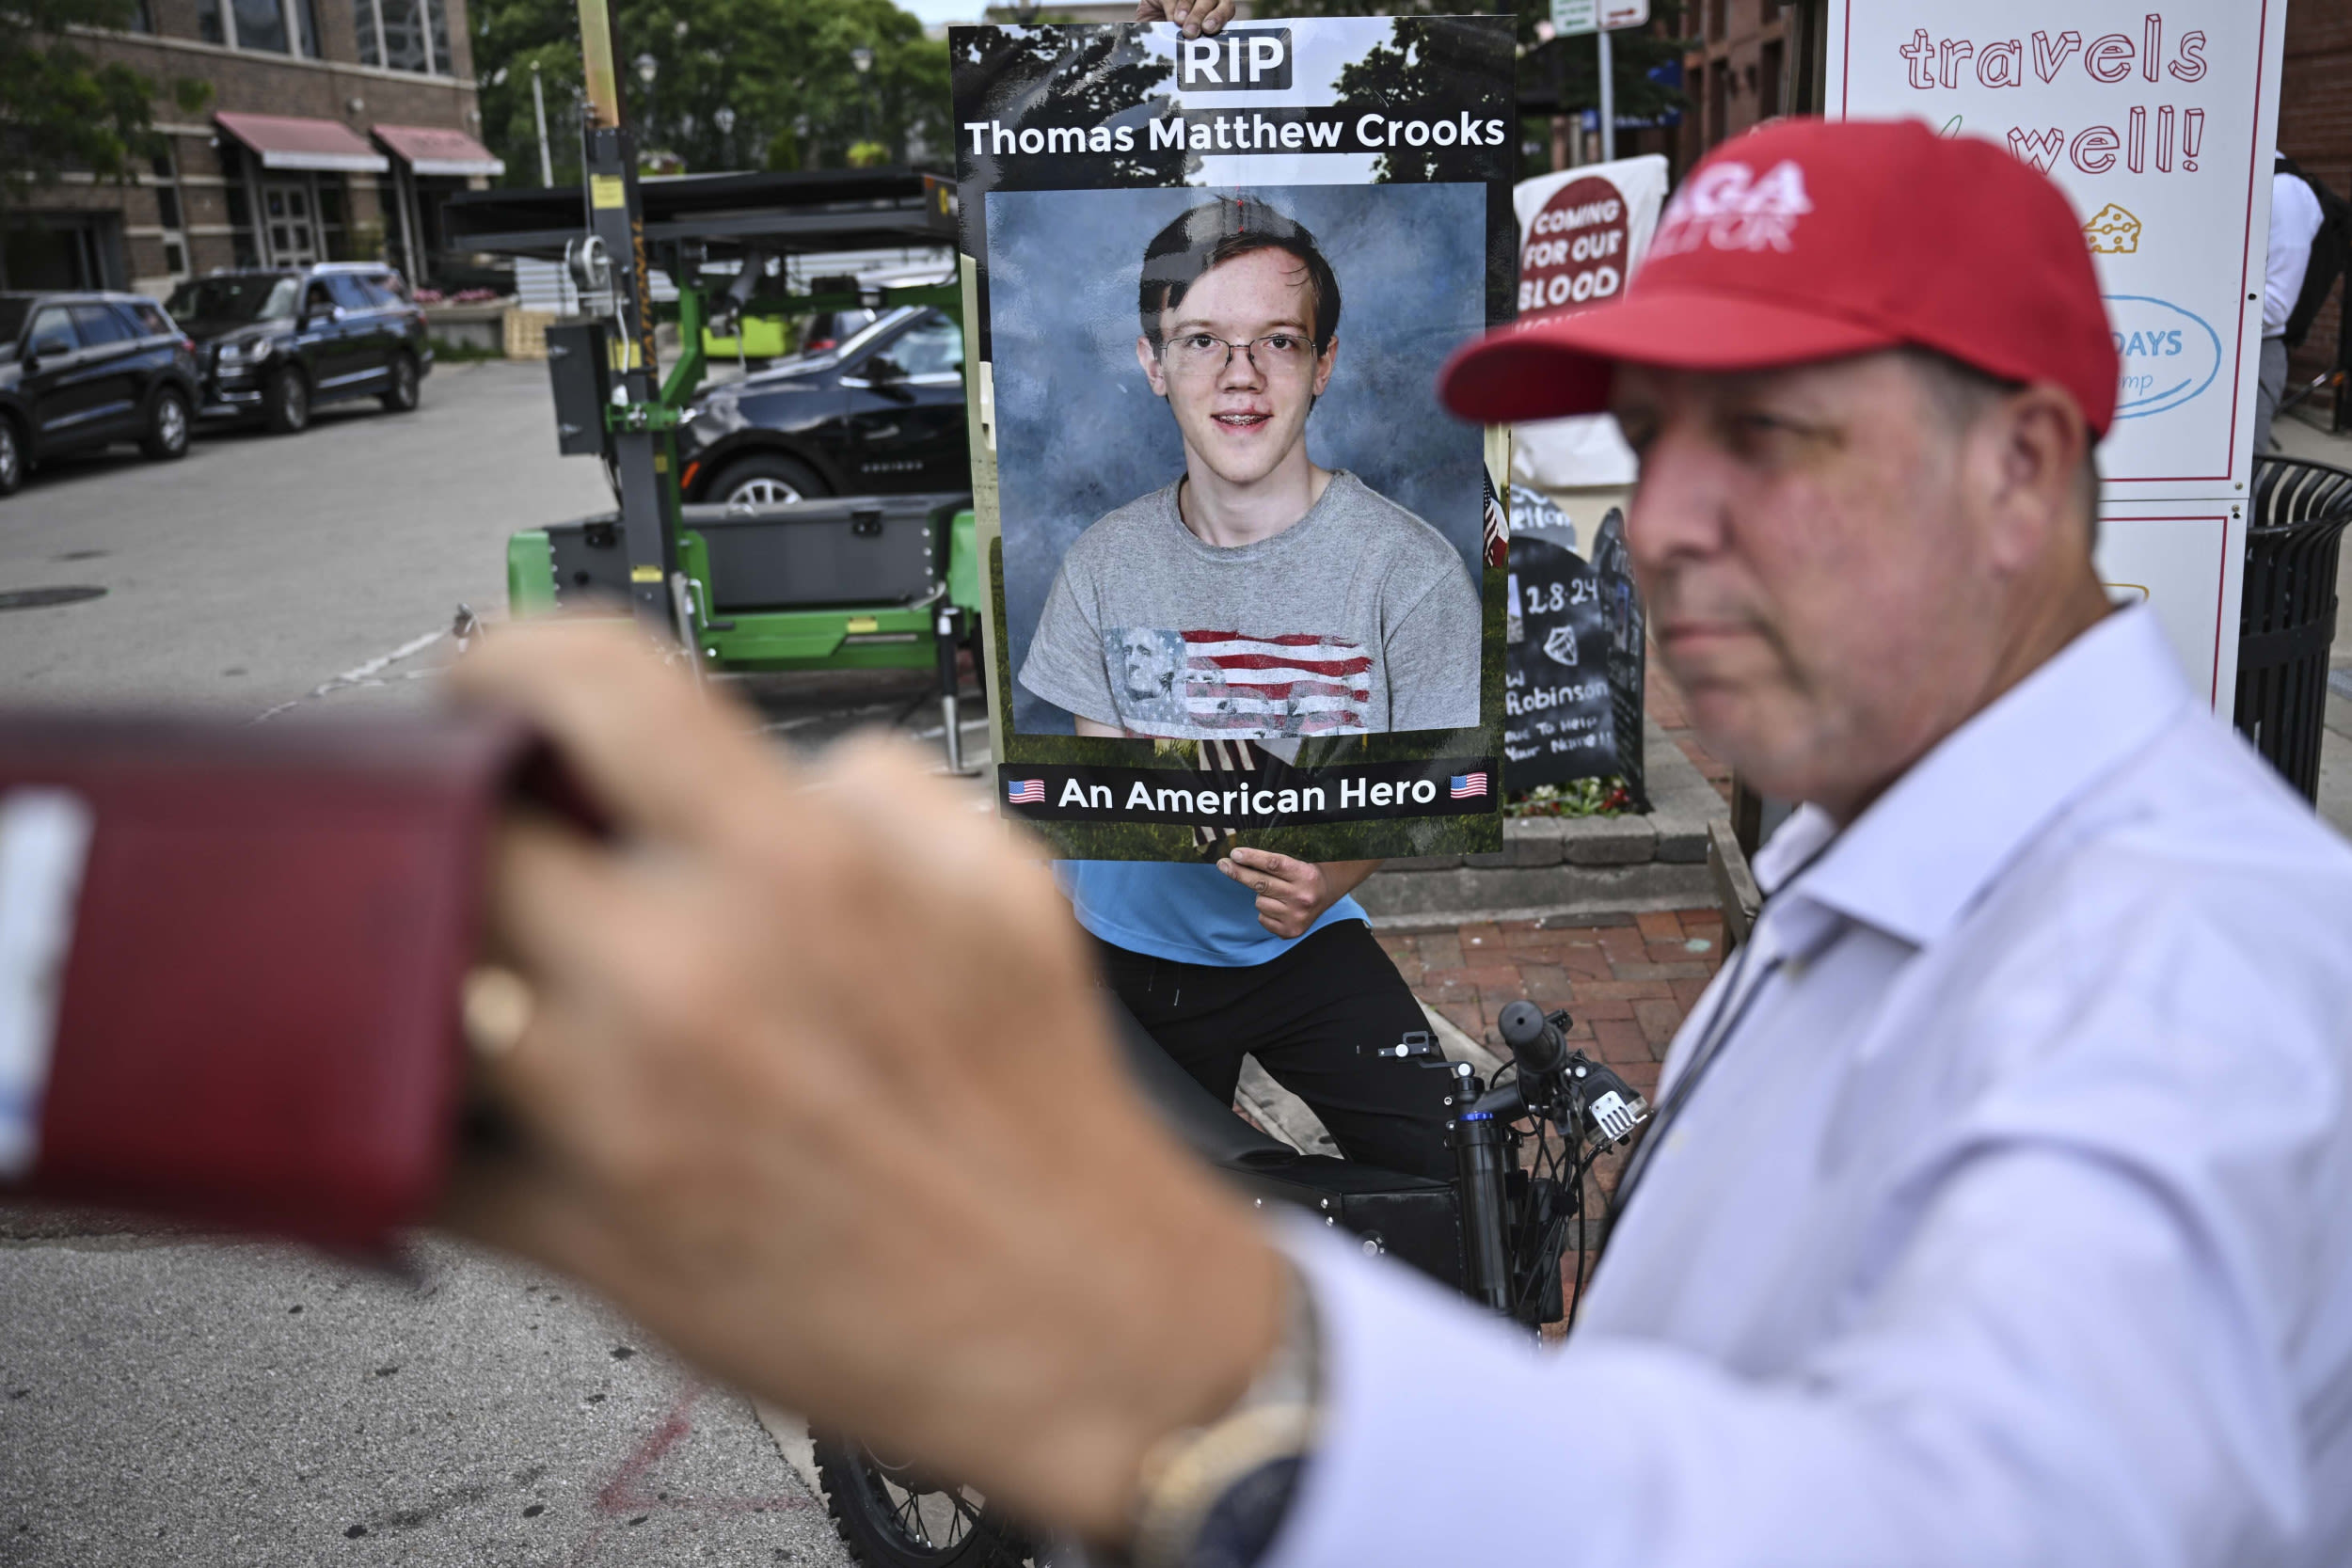 Armed person stands outside RNC with poster calling Thomas Crooks a 'hero'